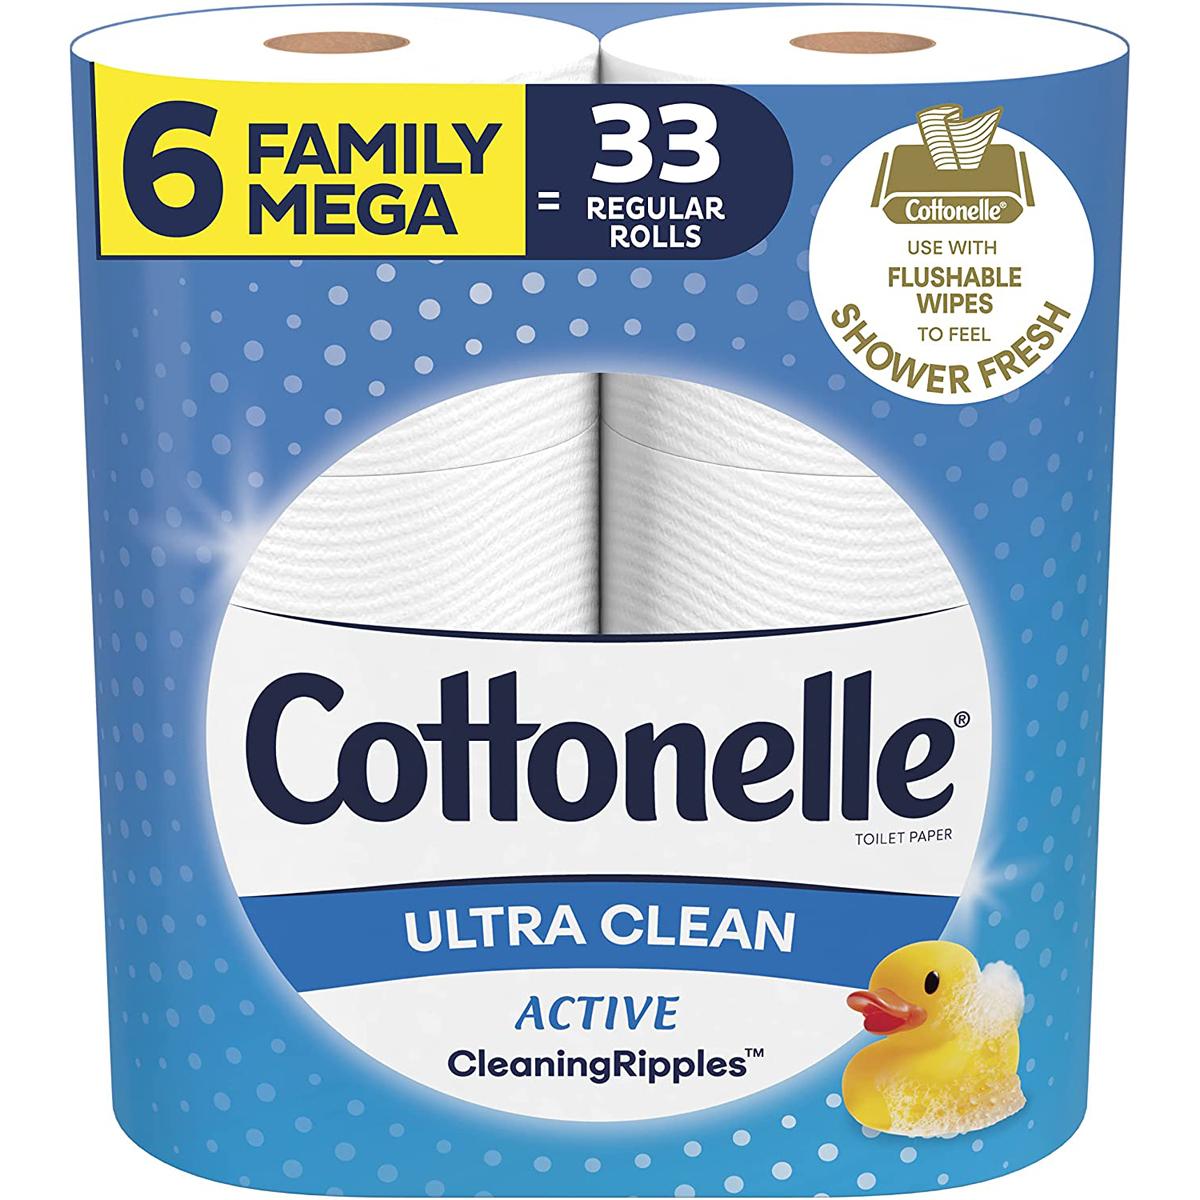 6 Cottonelle Ultra Clean Family Mega Rolls Toilet Paper for $7.88 Shipped